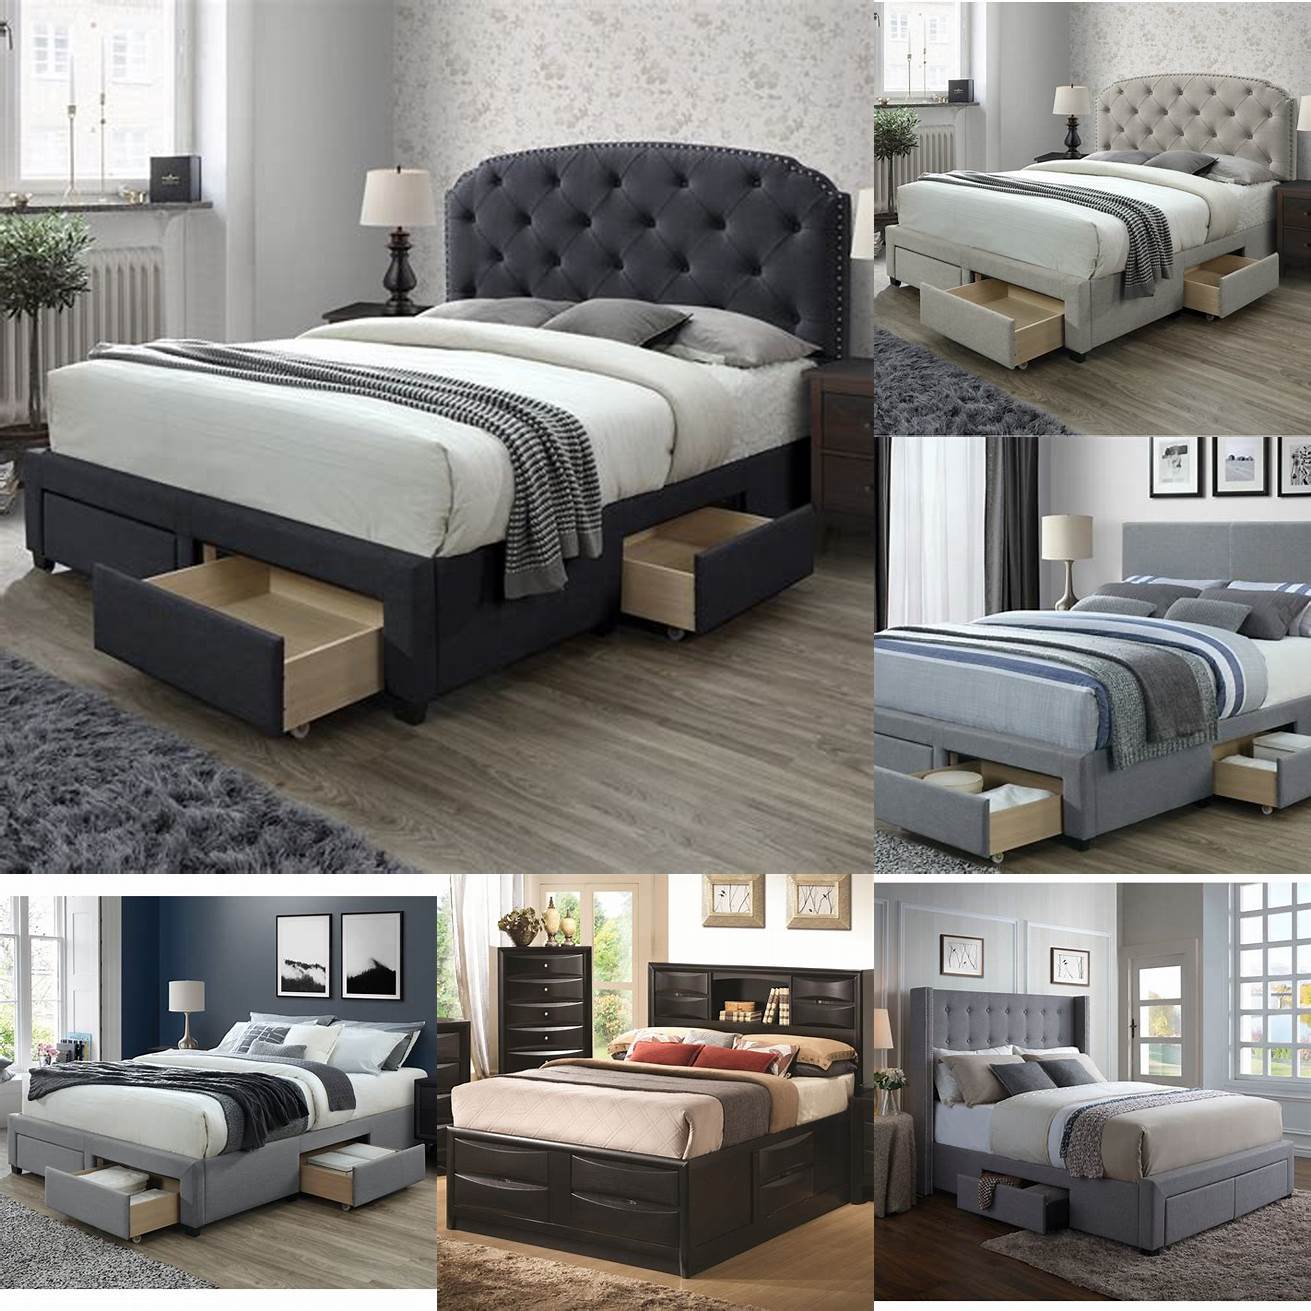 3 Super king bed with storage drawers